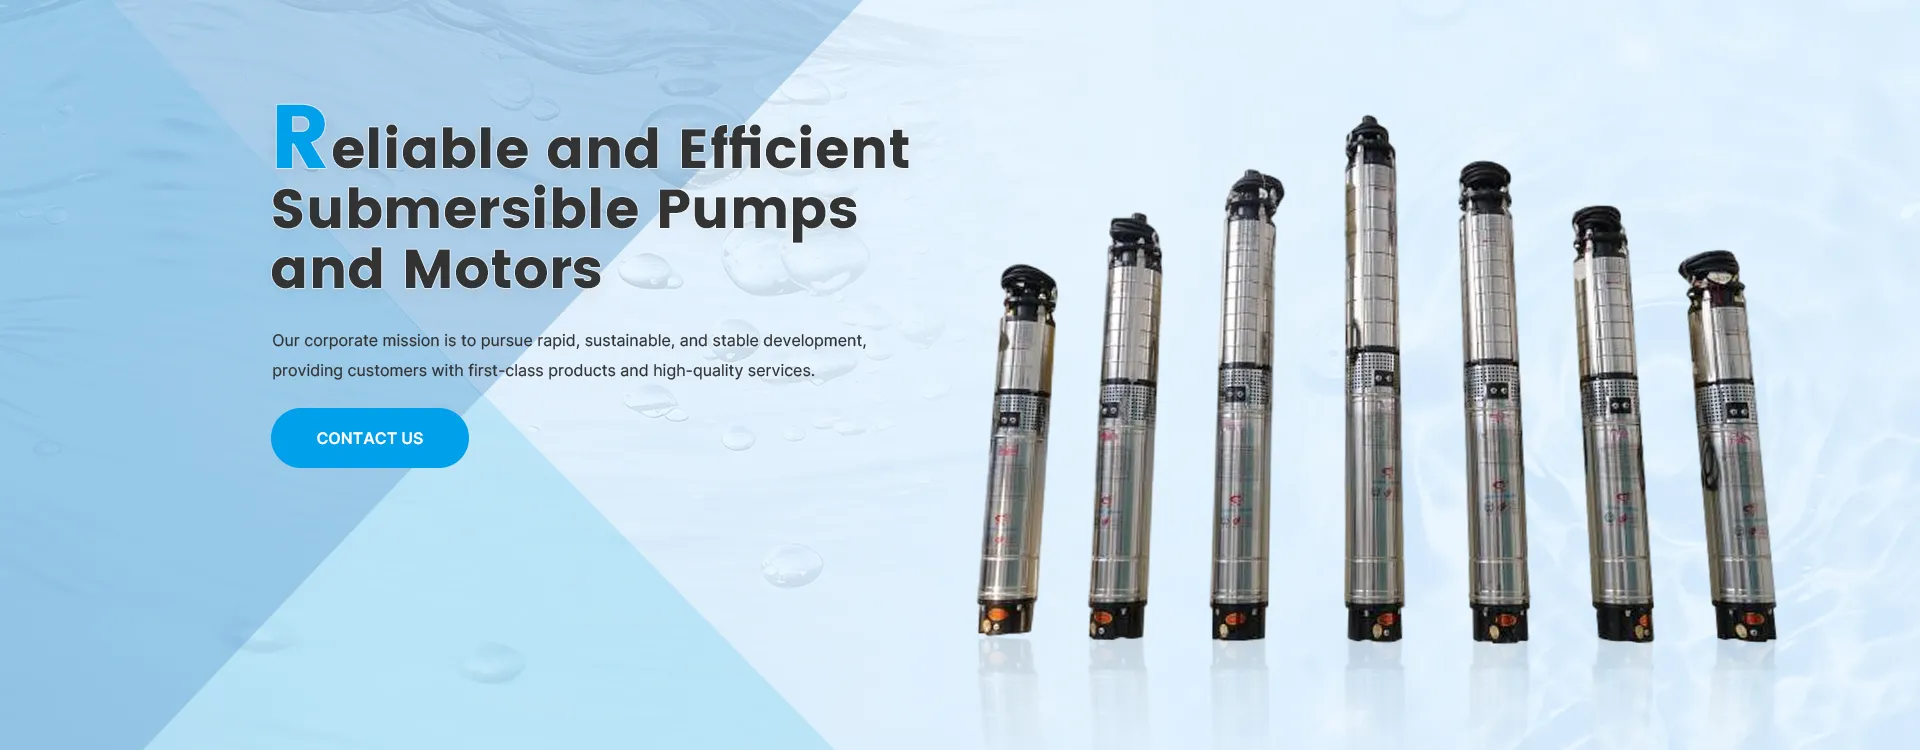 Stainless Steel Submersible Electric Pumps